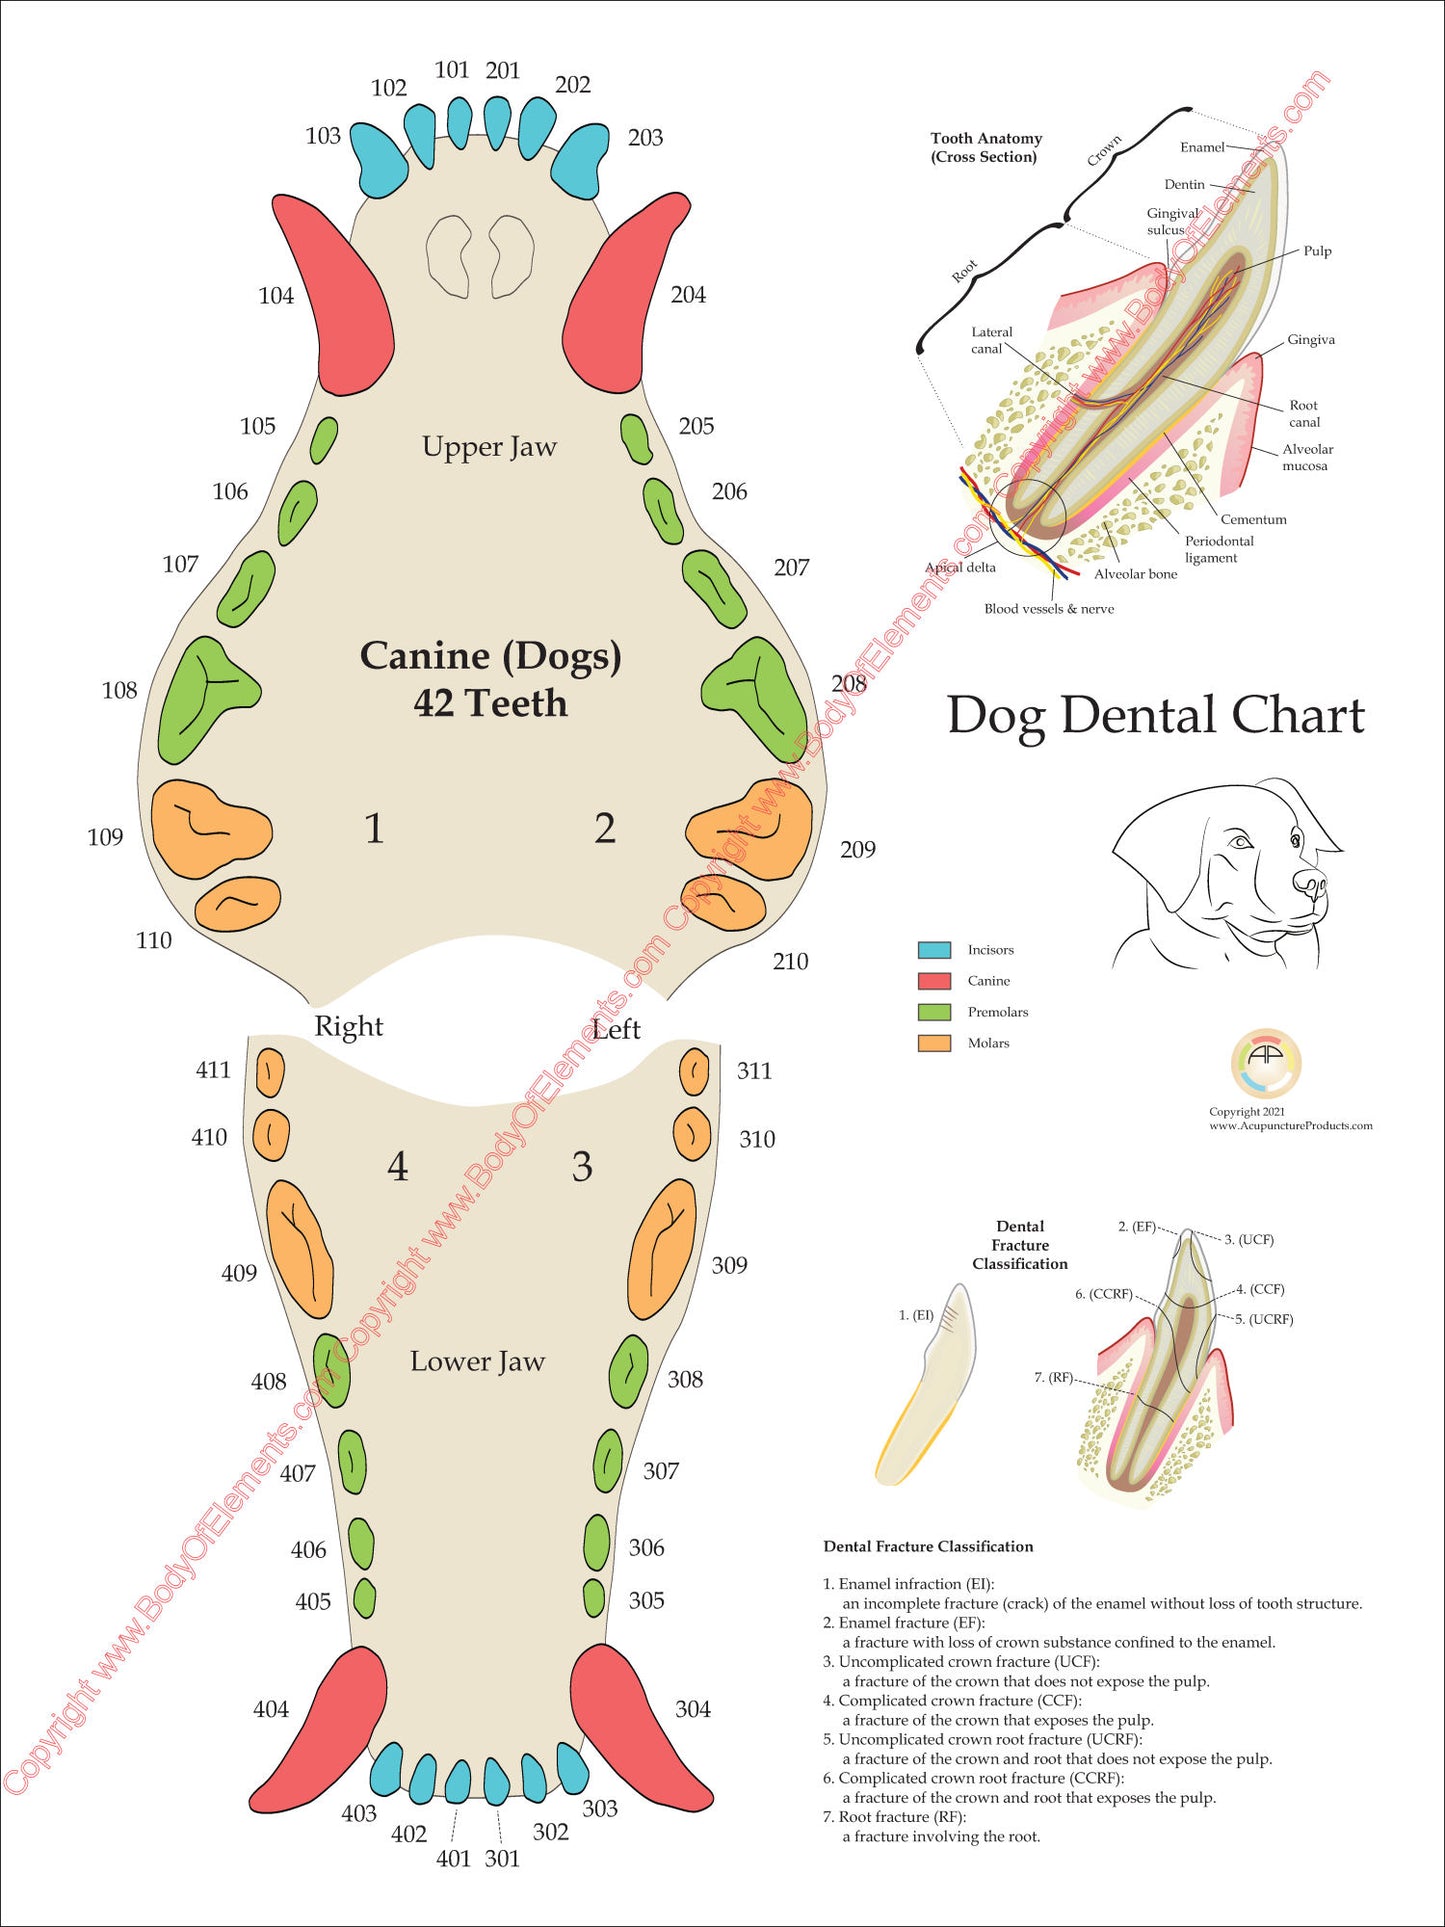 Dog dental tooth numbering system chart